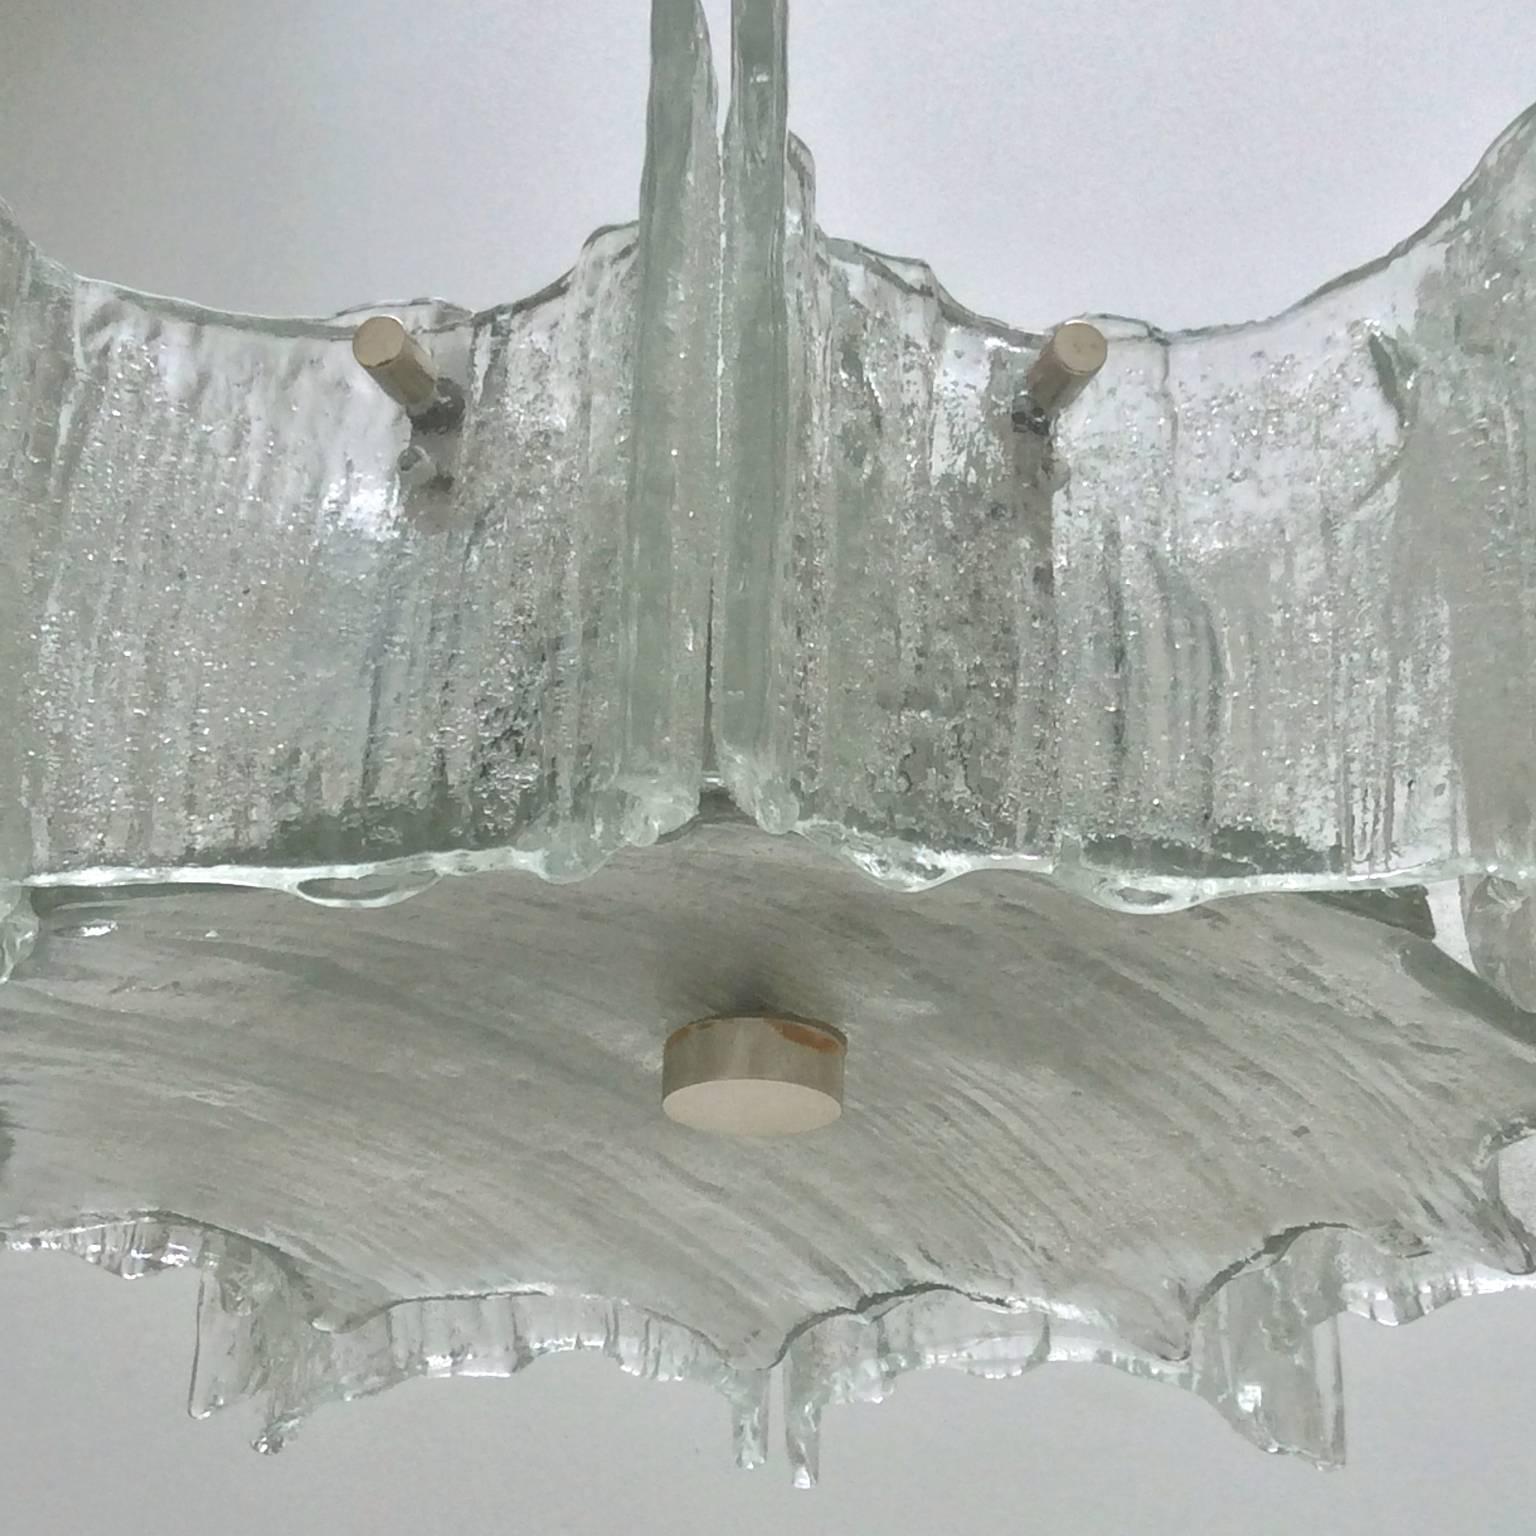 Chandelier or pendant light in heavy textured glass by Kaiser Leuchten, Germany, 1960s.

The fixture is made up of ten scalloped side panels over a single disc of the same textured glass. The panels have small grains of glass on the reverse side